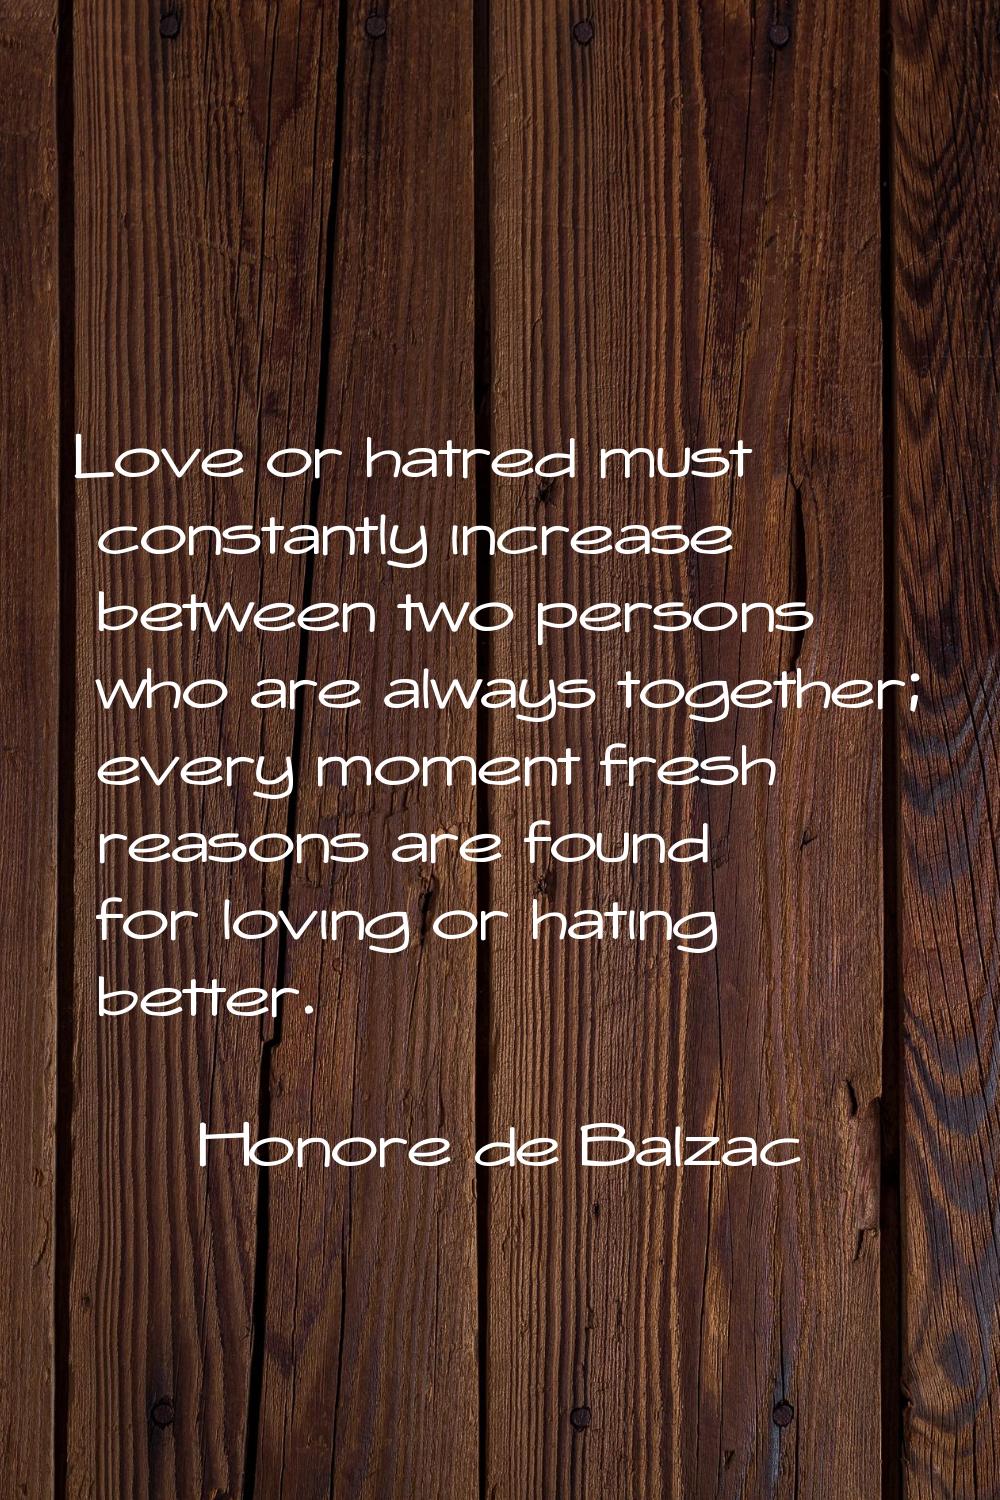 Love or hatred must constantly increase between two persons who are always together; every moment f